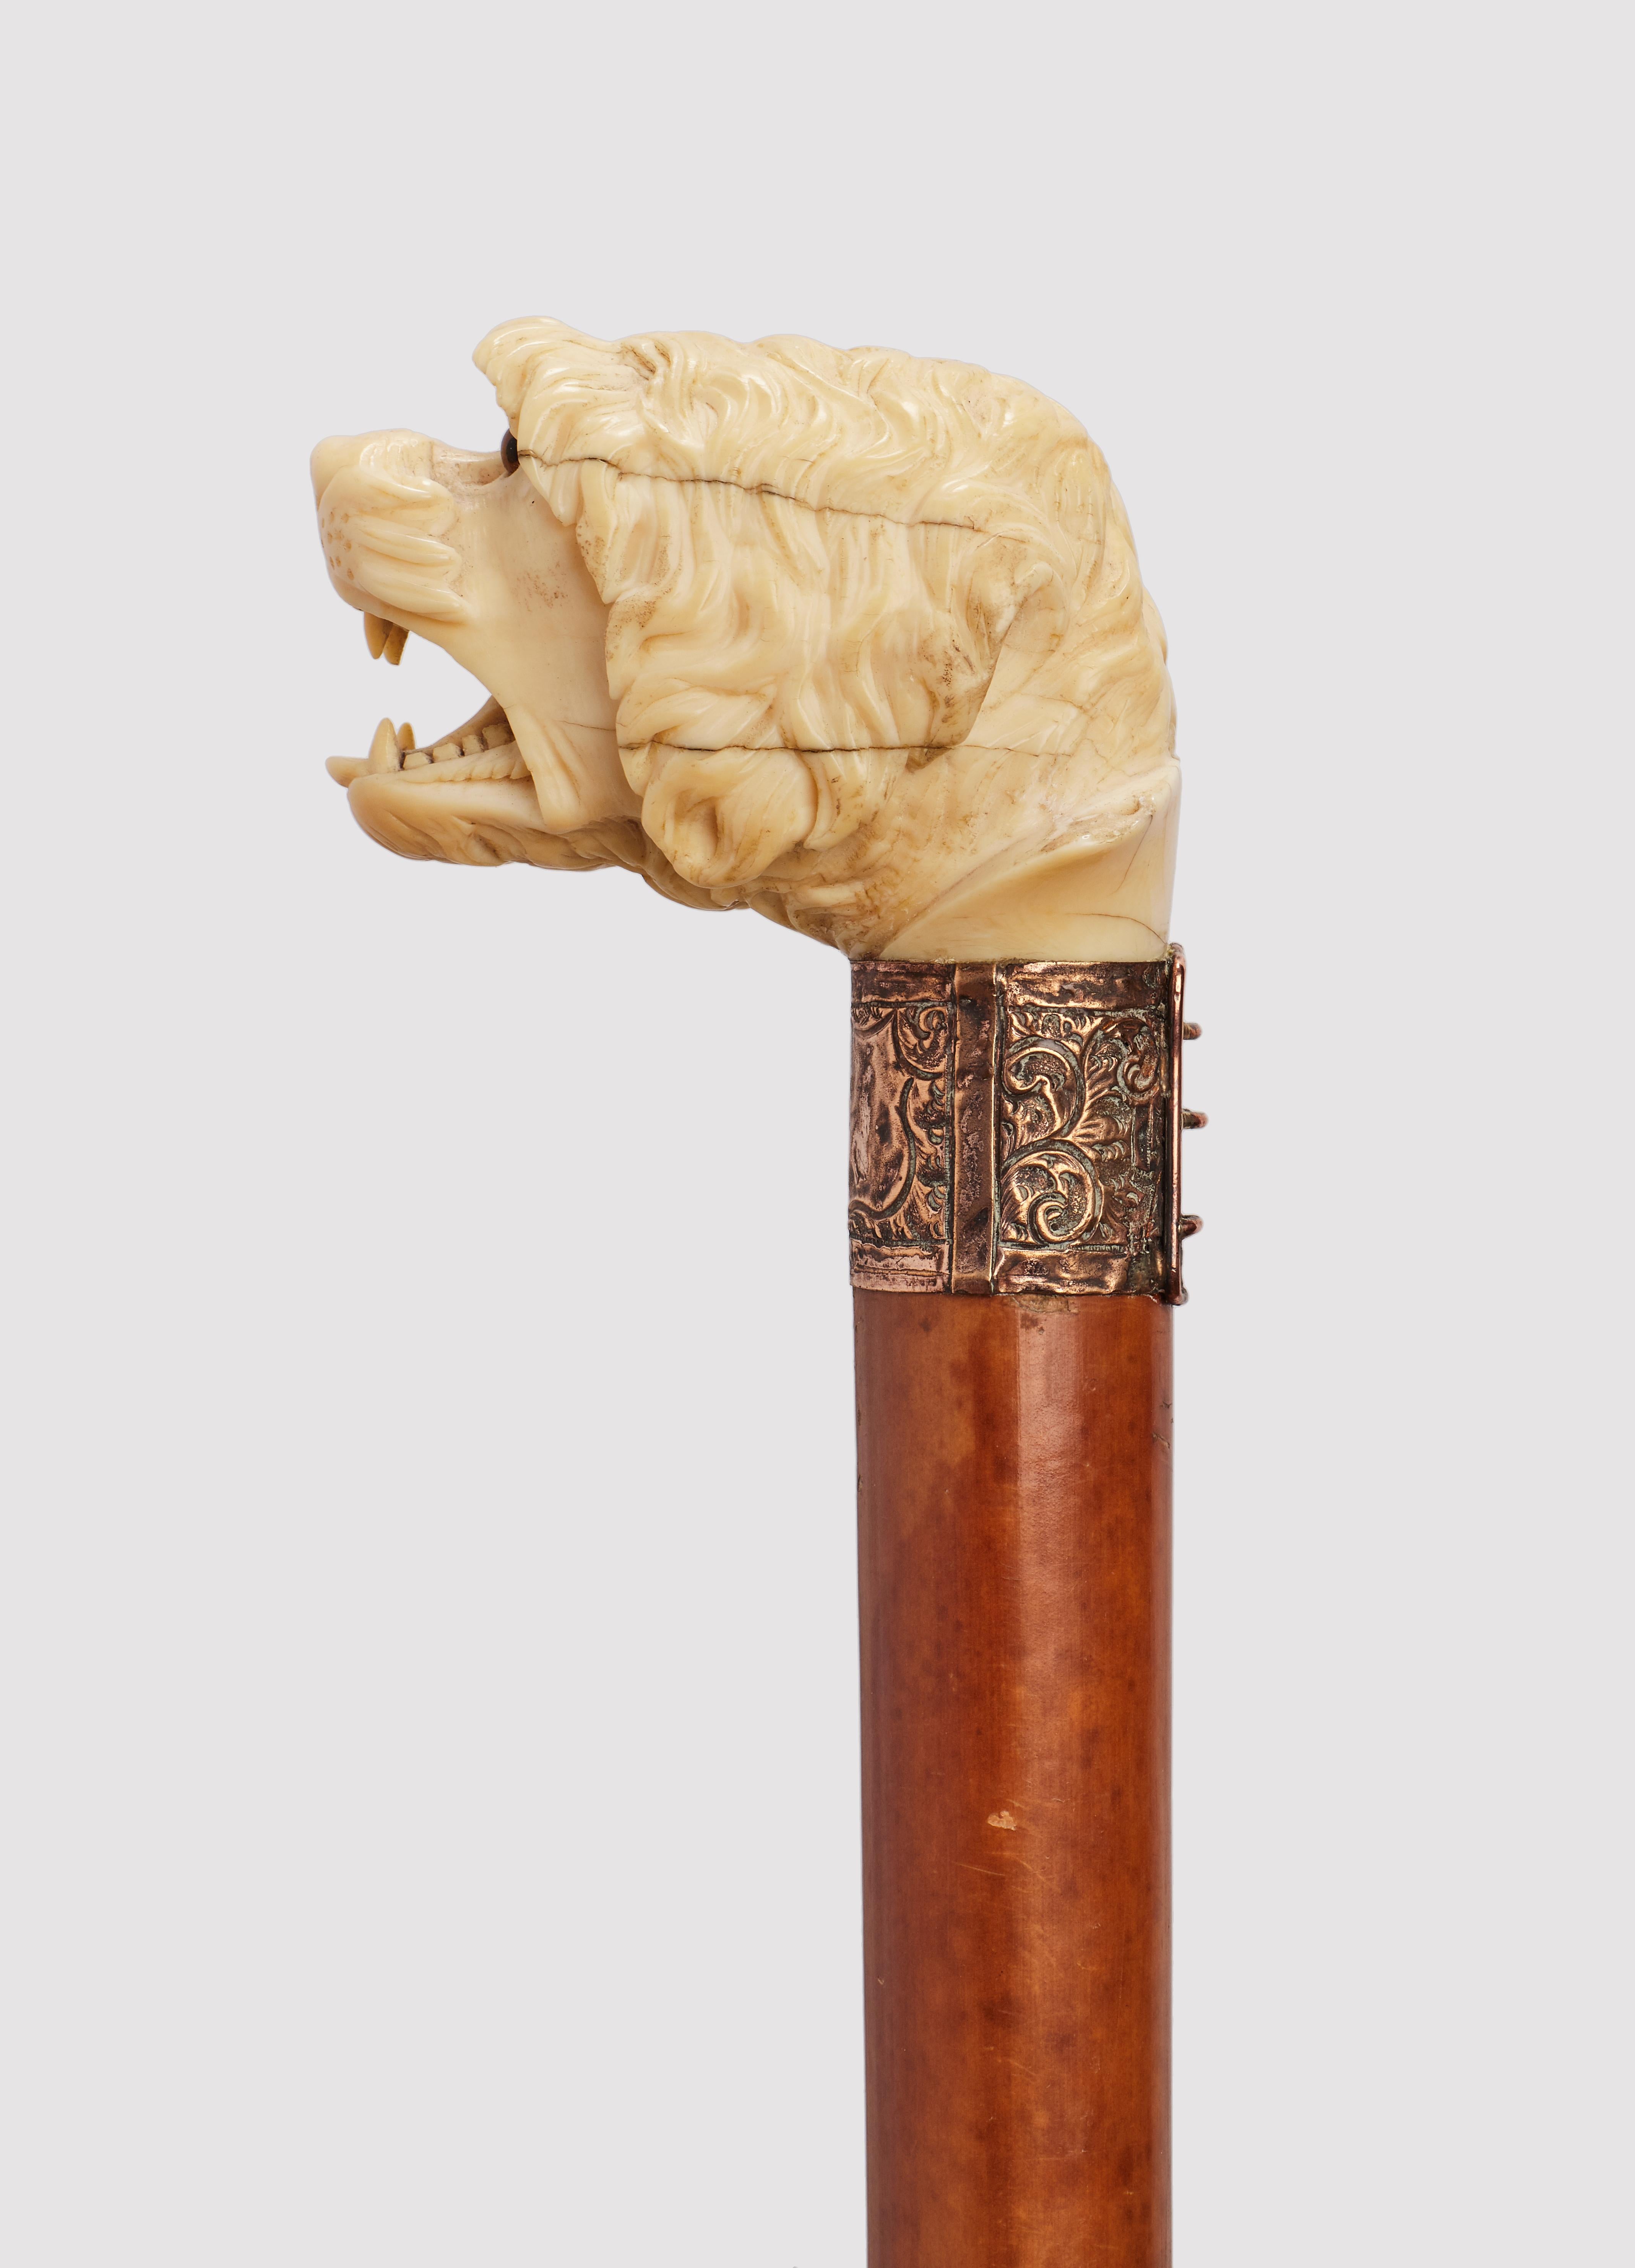 Walking stick: carved ivory handle depicting a dog’s head with open mouth. Sulfur glass eyes. Malacca wood shaft. Brass ring. Metal ferrule. England circa 1890. (SHIP TO EU ONLY)